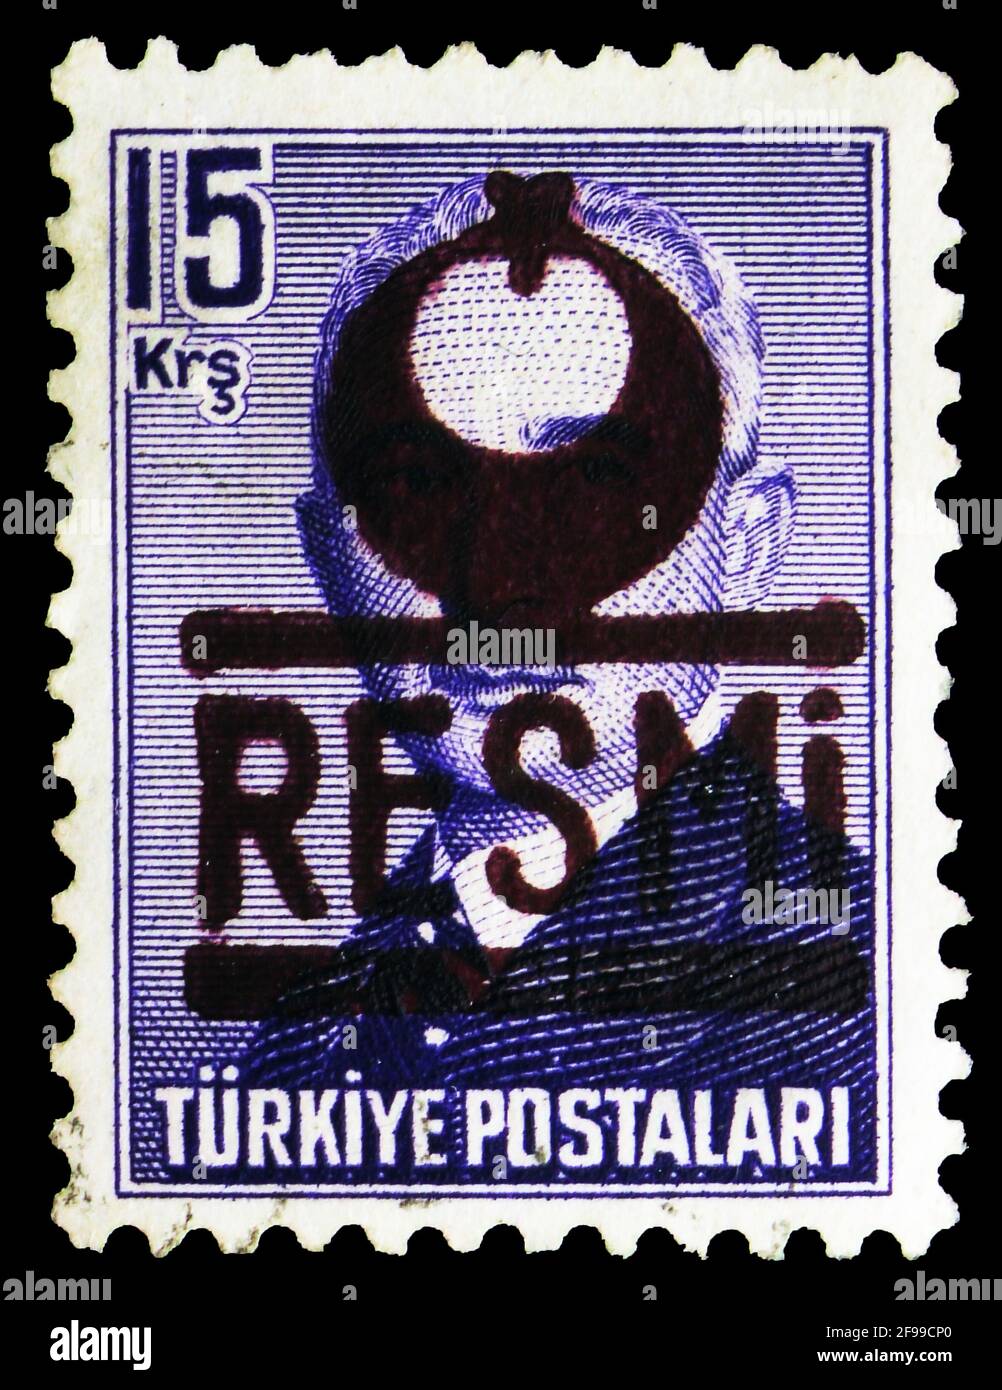 MOSCOW, RUSSIA - NOVEMBER 4, 2019: Postage stamp printed in Turkey shows Ismet Inonu (1884-1973), Overprinted in Dark Brown, Official Stamps, Ismet In Stock Photo